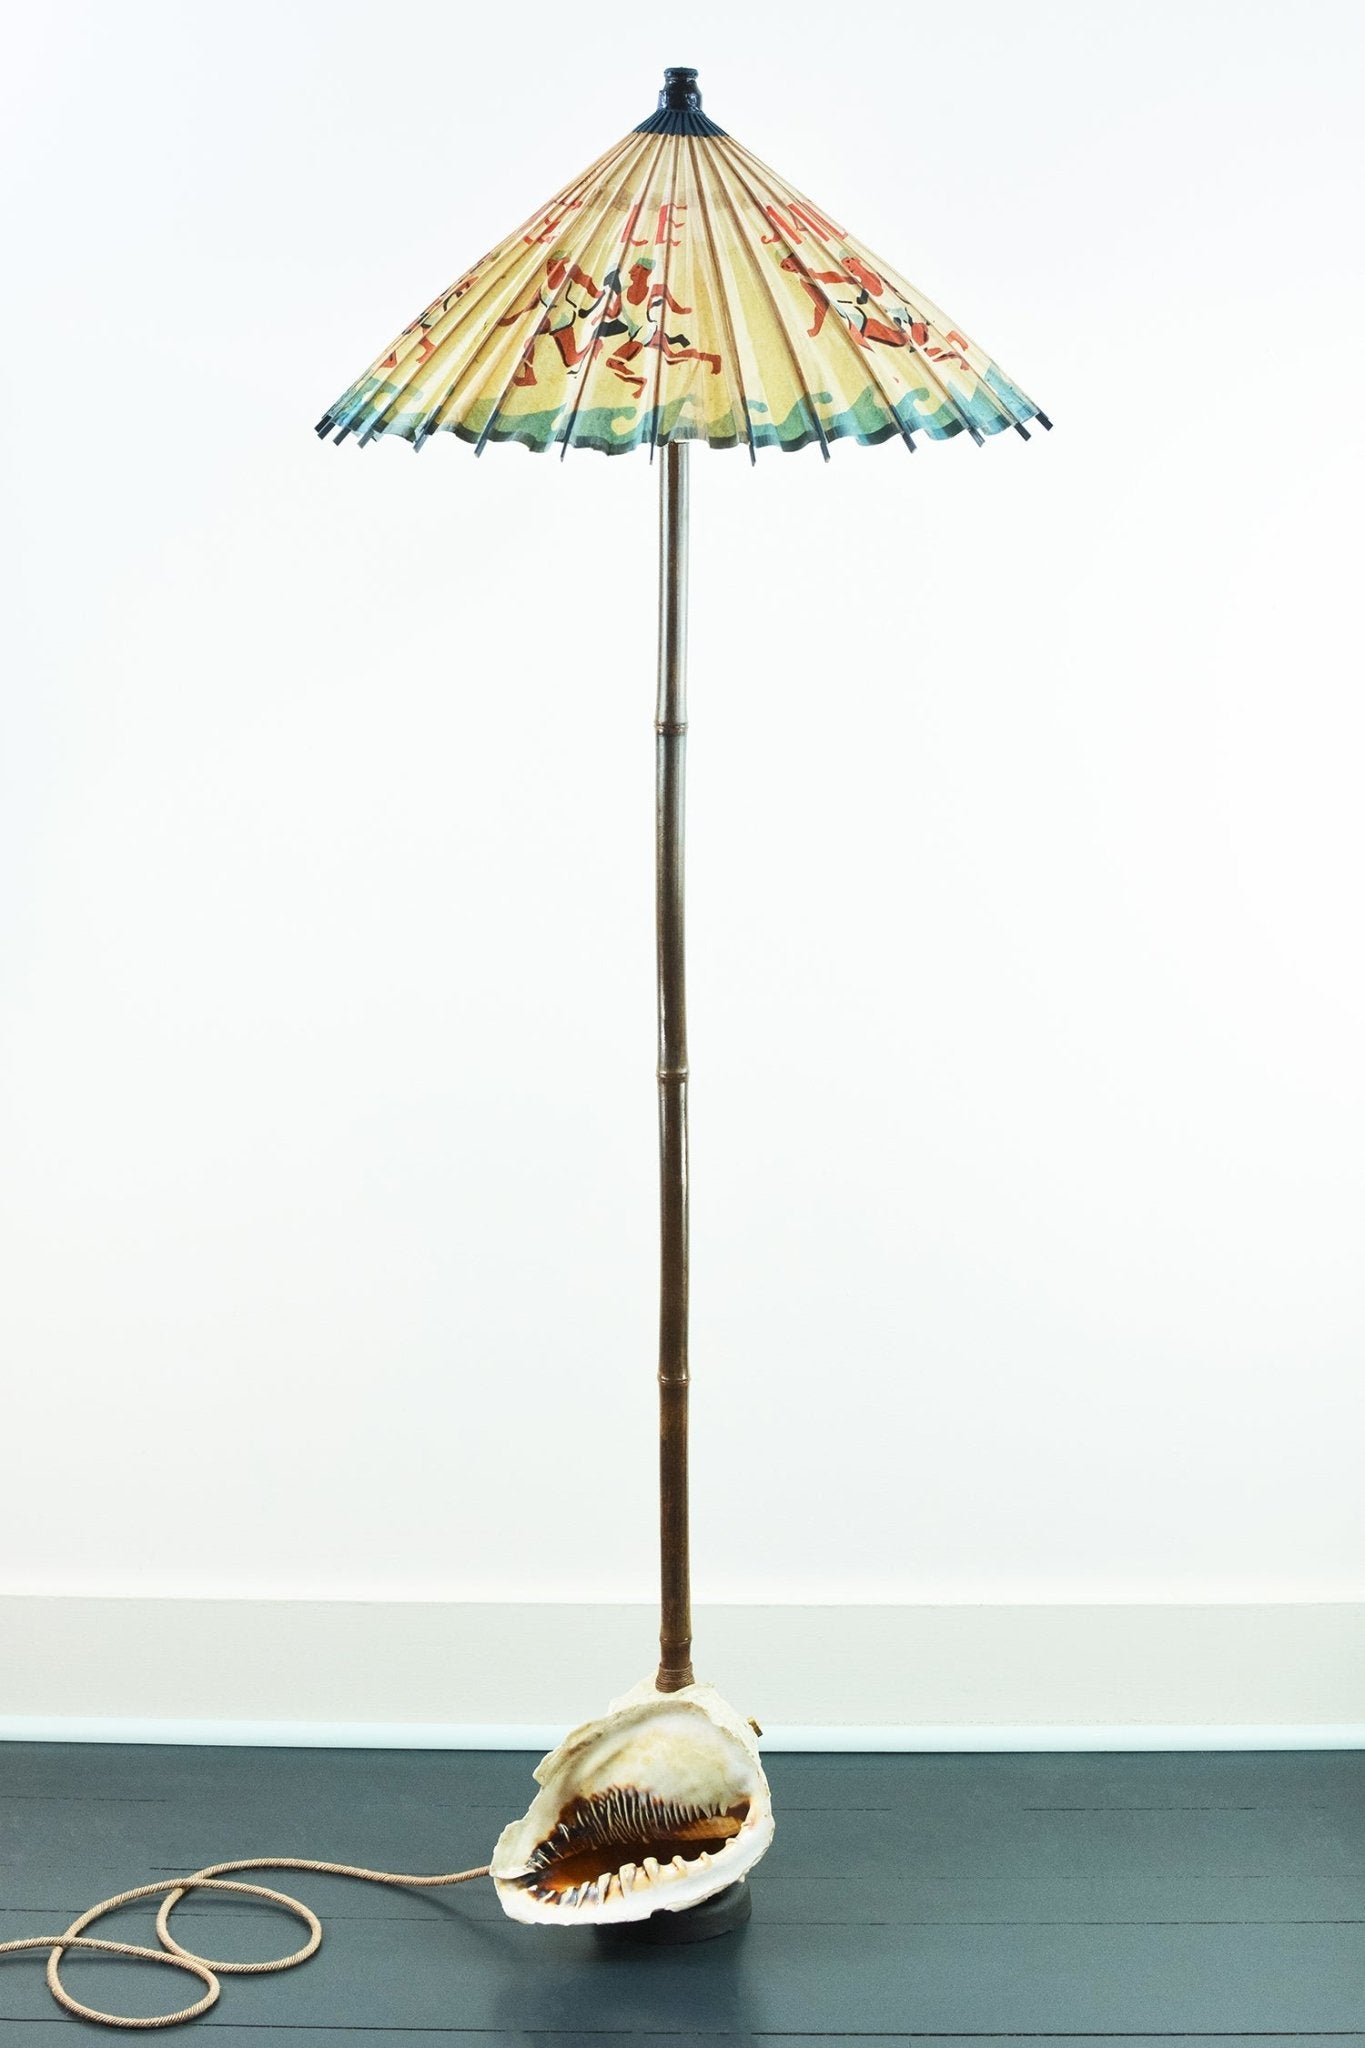 'Queen Helmet Conch Shell' Black Bamboo Floor Lamp with French Parasol Shade — Model No. 014 - Tennant New York